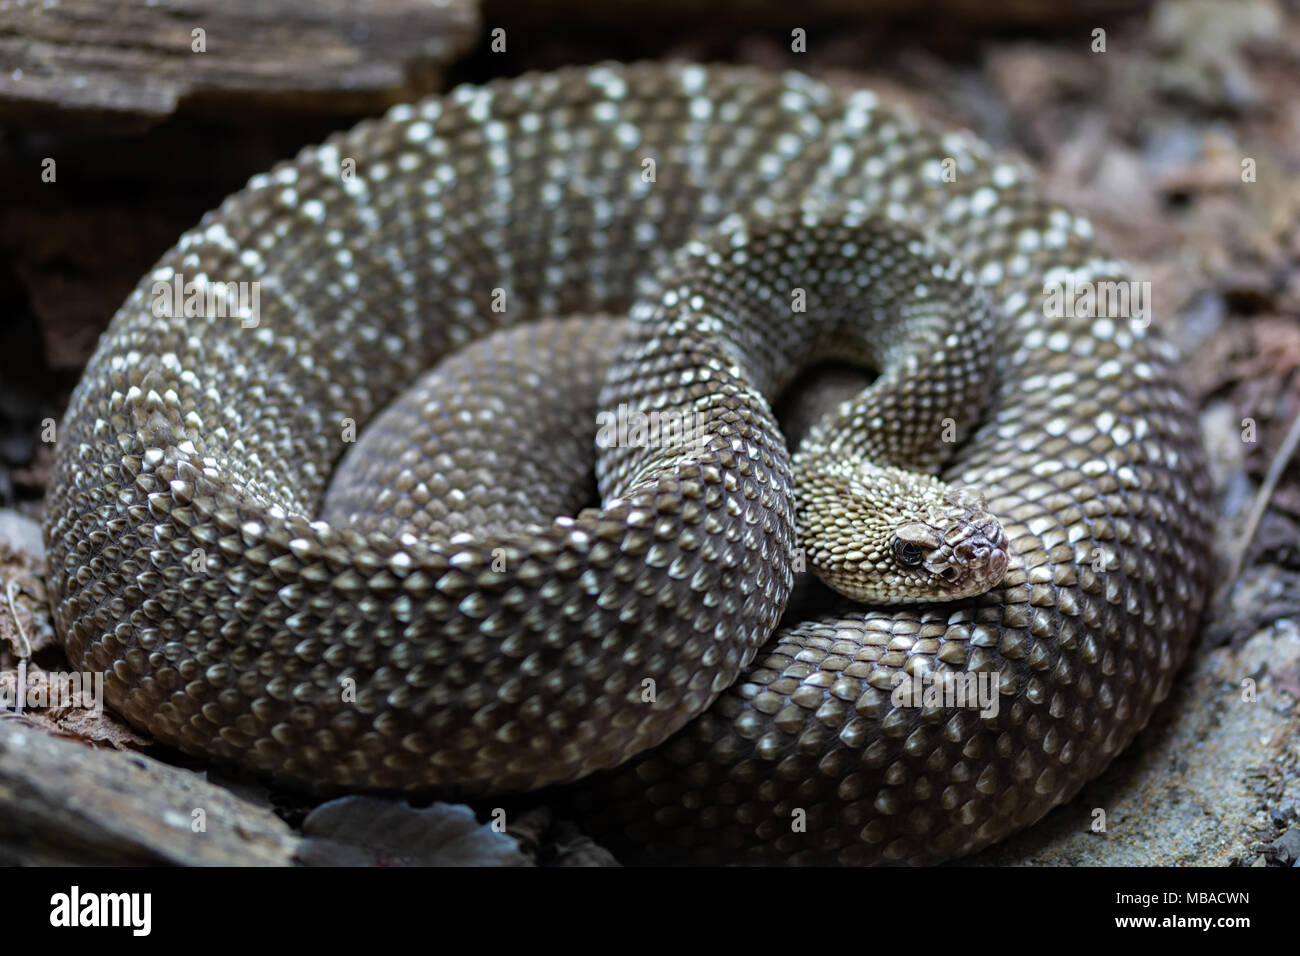 Rattlesnake of the reeds. Rattlesnakes are a group of venomous snakes of the genera Crotalus and Sistrurus of the subfamily Crotalinae. Stock Photo